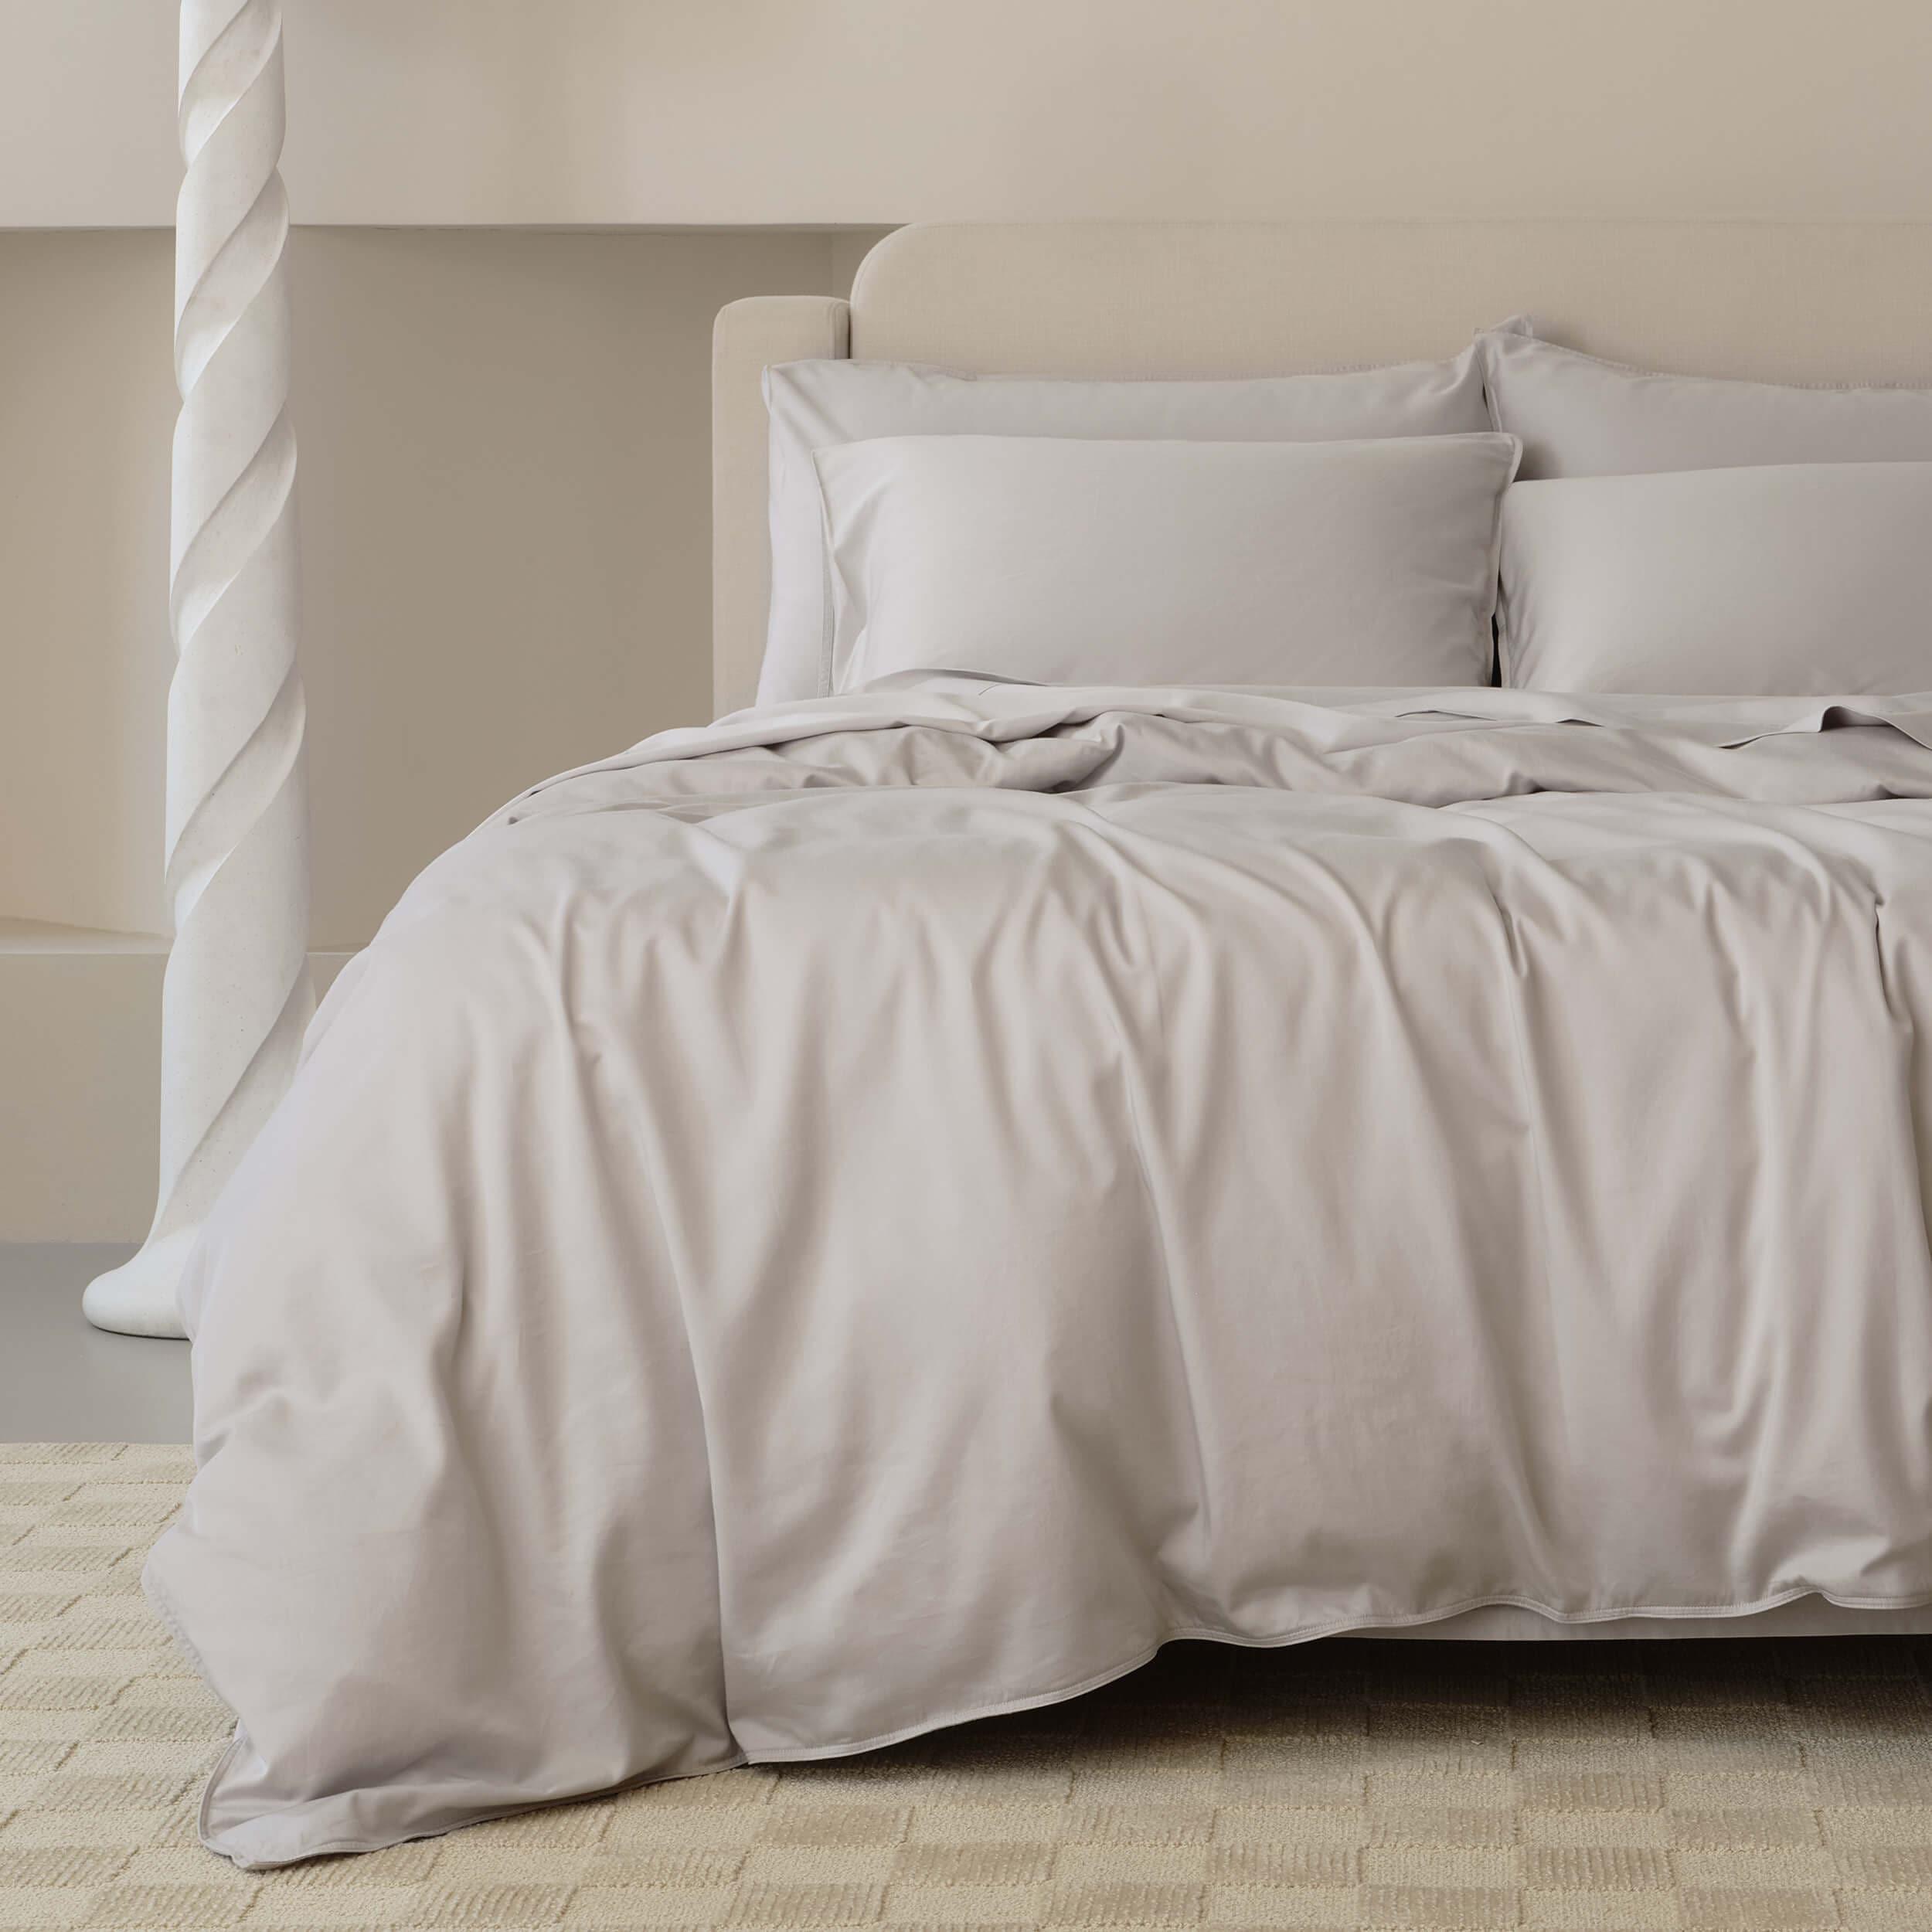 Find the perfect queen duvet cover sets to match your unique style and taste.